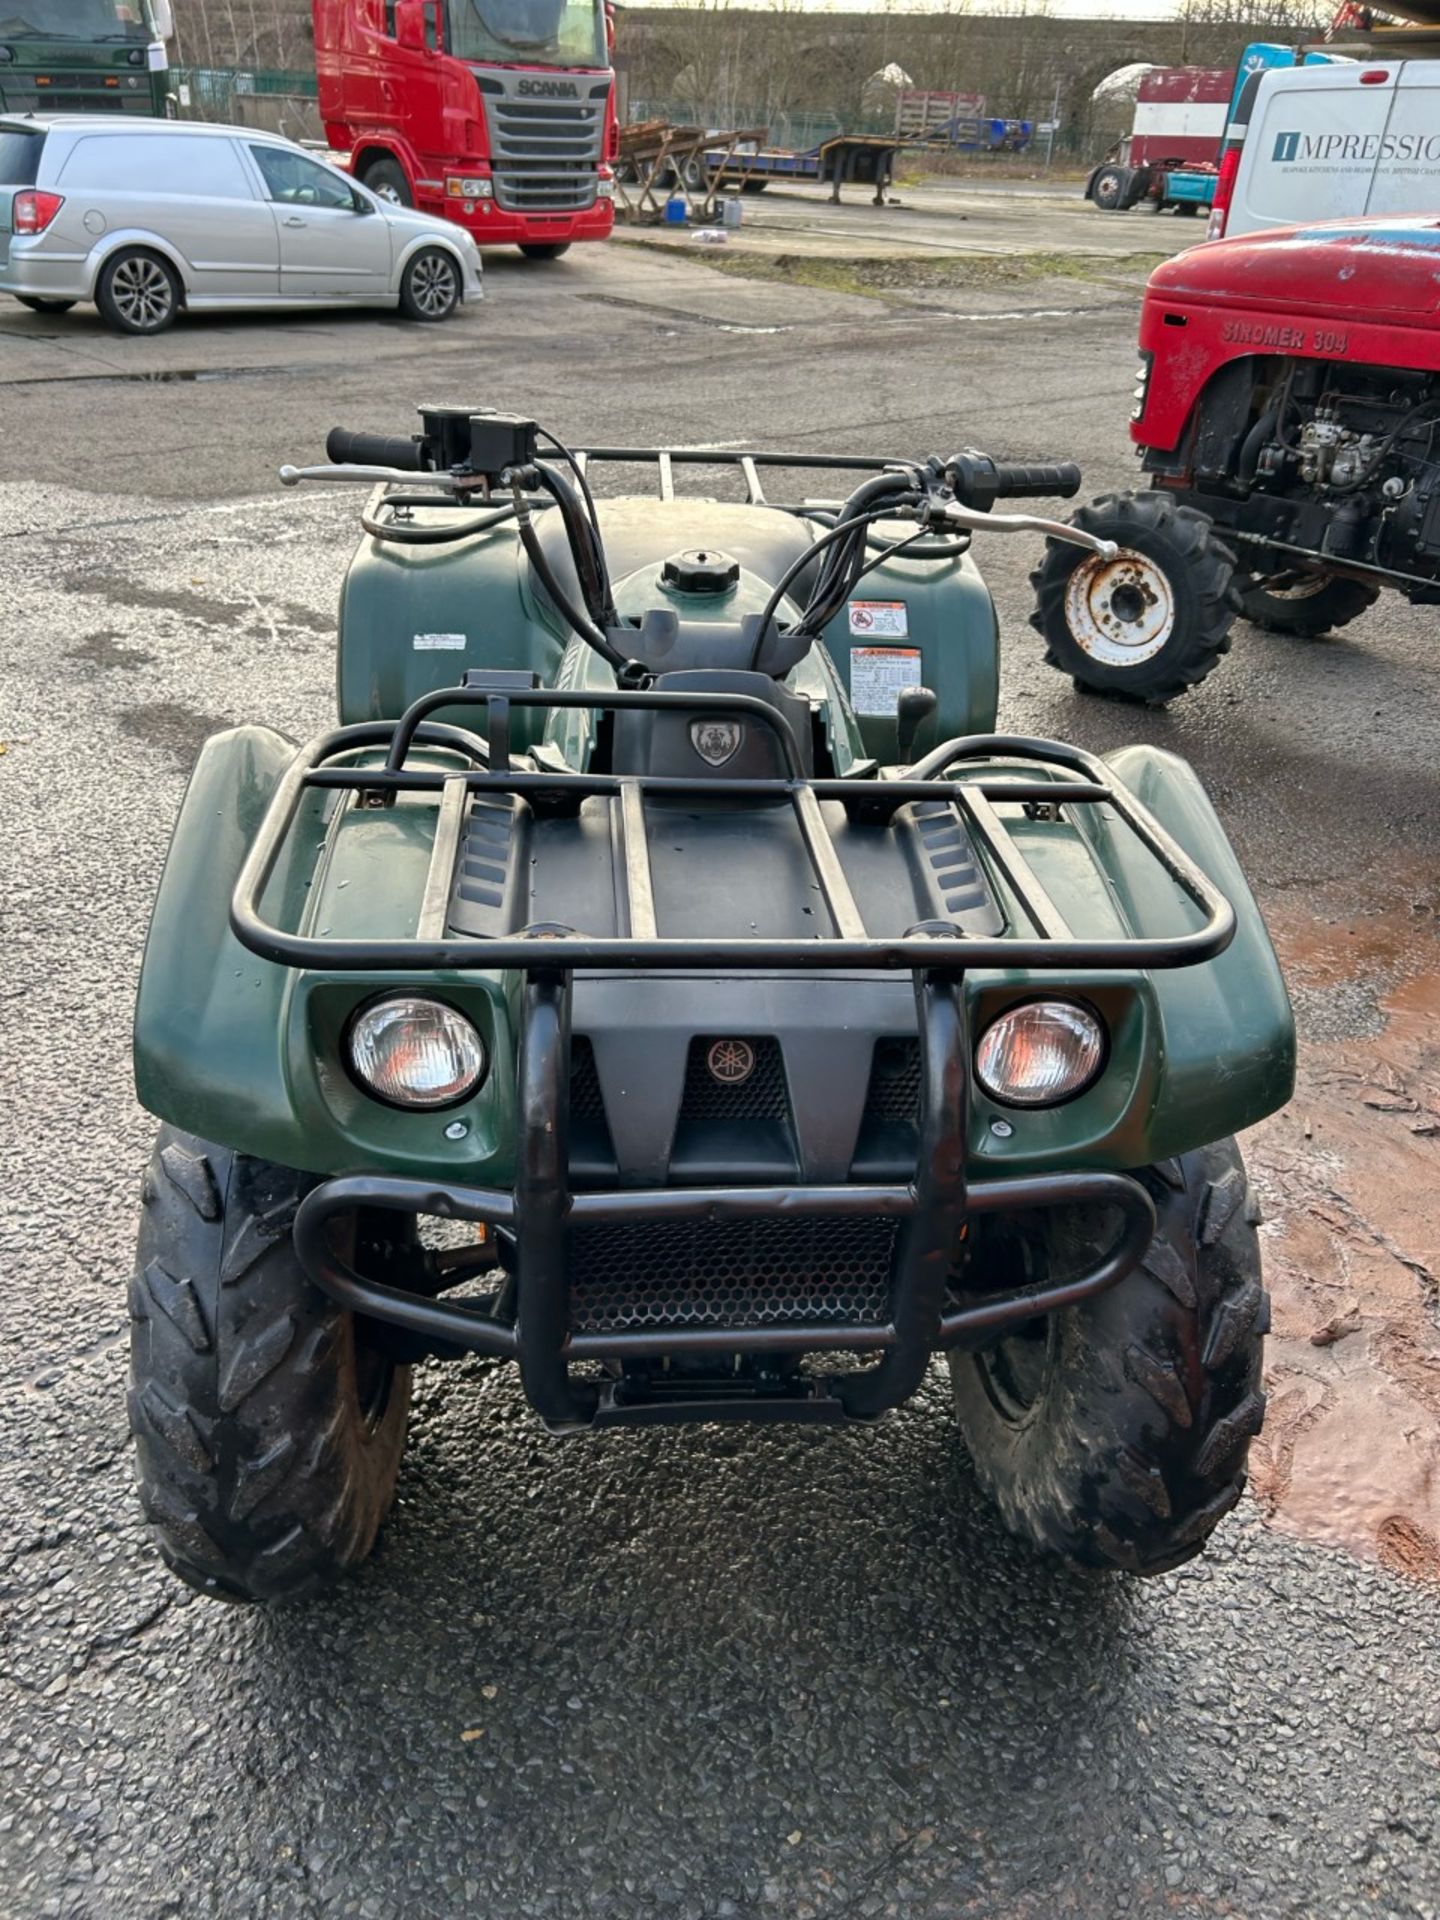 Yamaha grizzly 400cc 4x4 quad bike. 2000 model. Good condition ready for work.